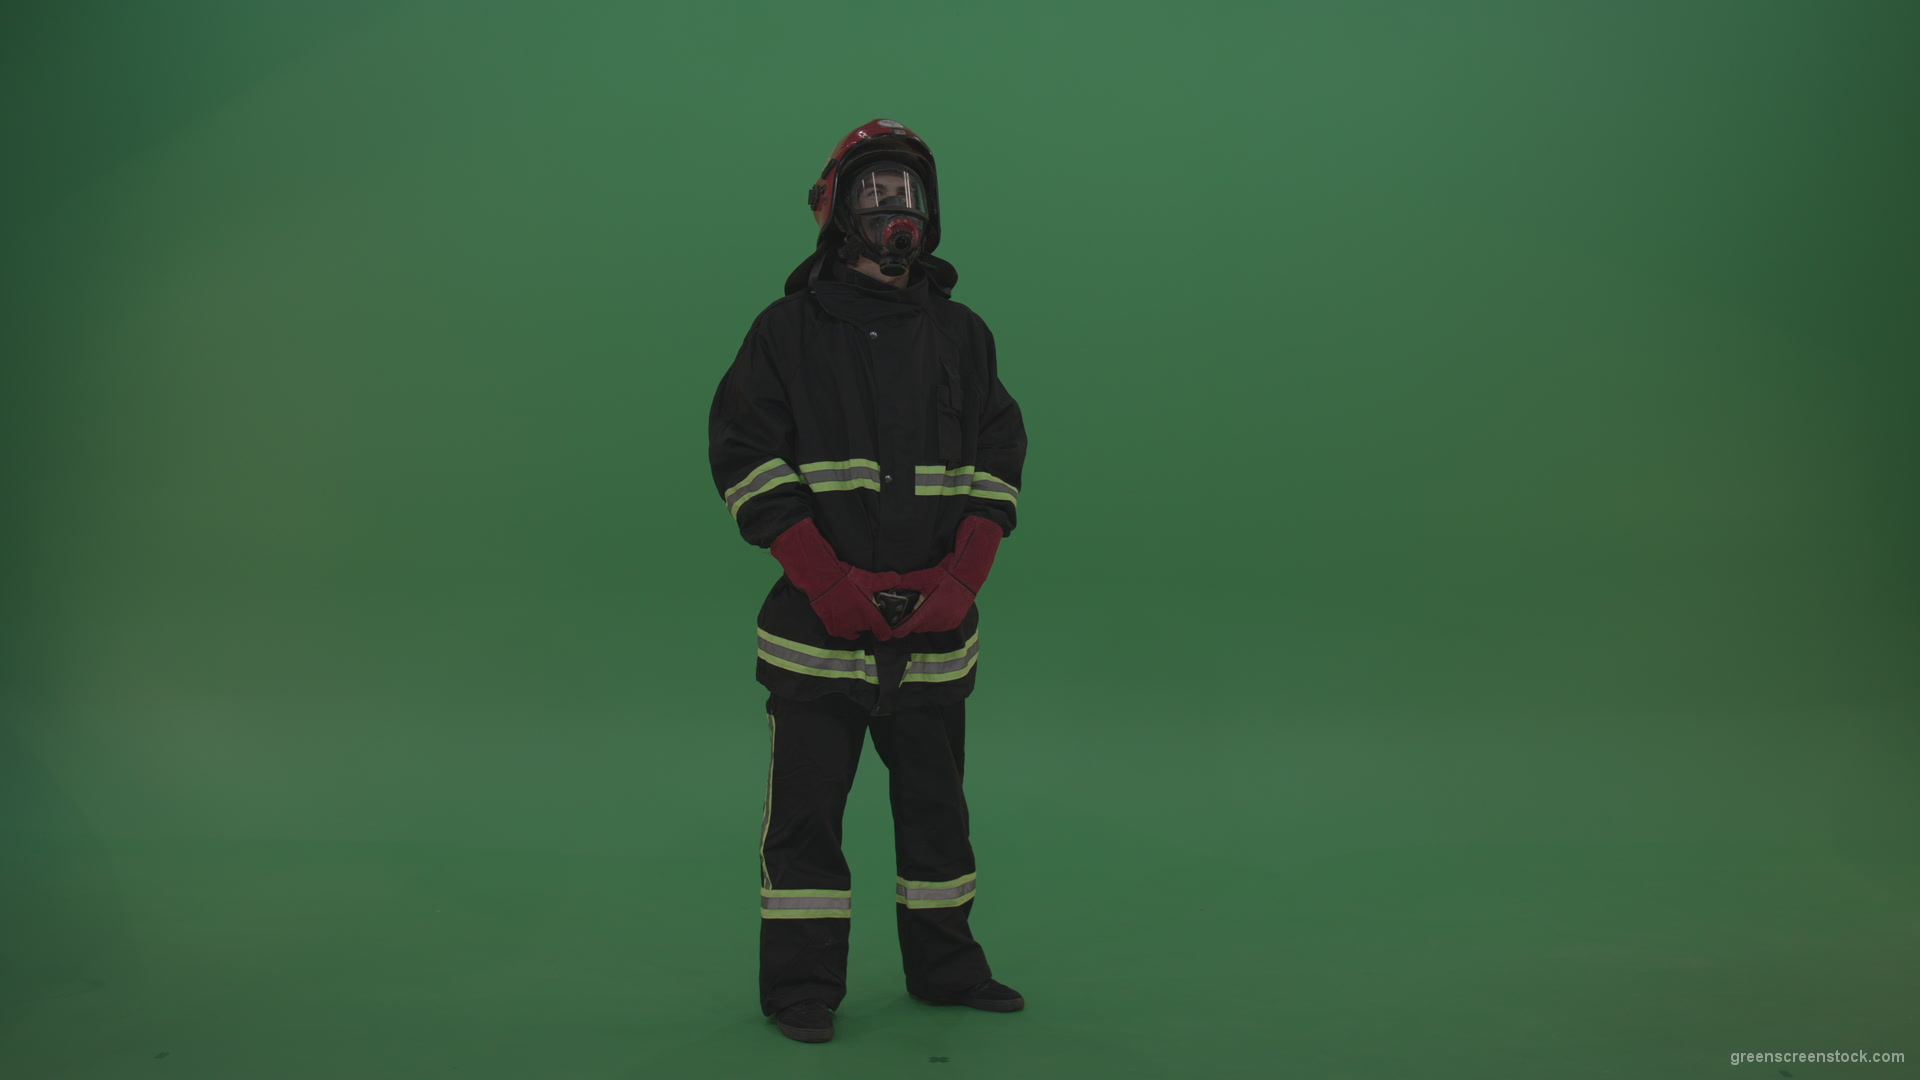 Young_Firefighter_Wearing_Full_FIreman_Working_Kit_Looking_Around_To_Fing_Some_Fire_Arson_Problems_On_Green_Screen_Wall_Background_009 Green Screen Stock